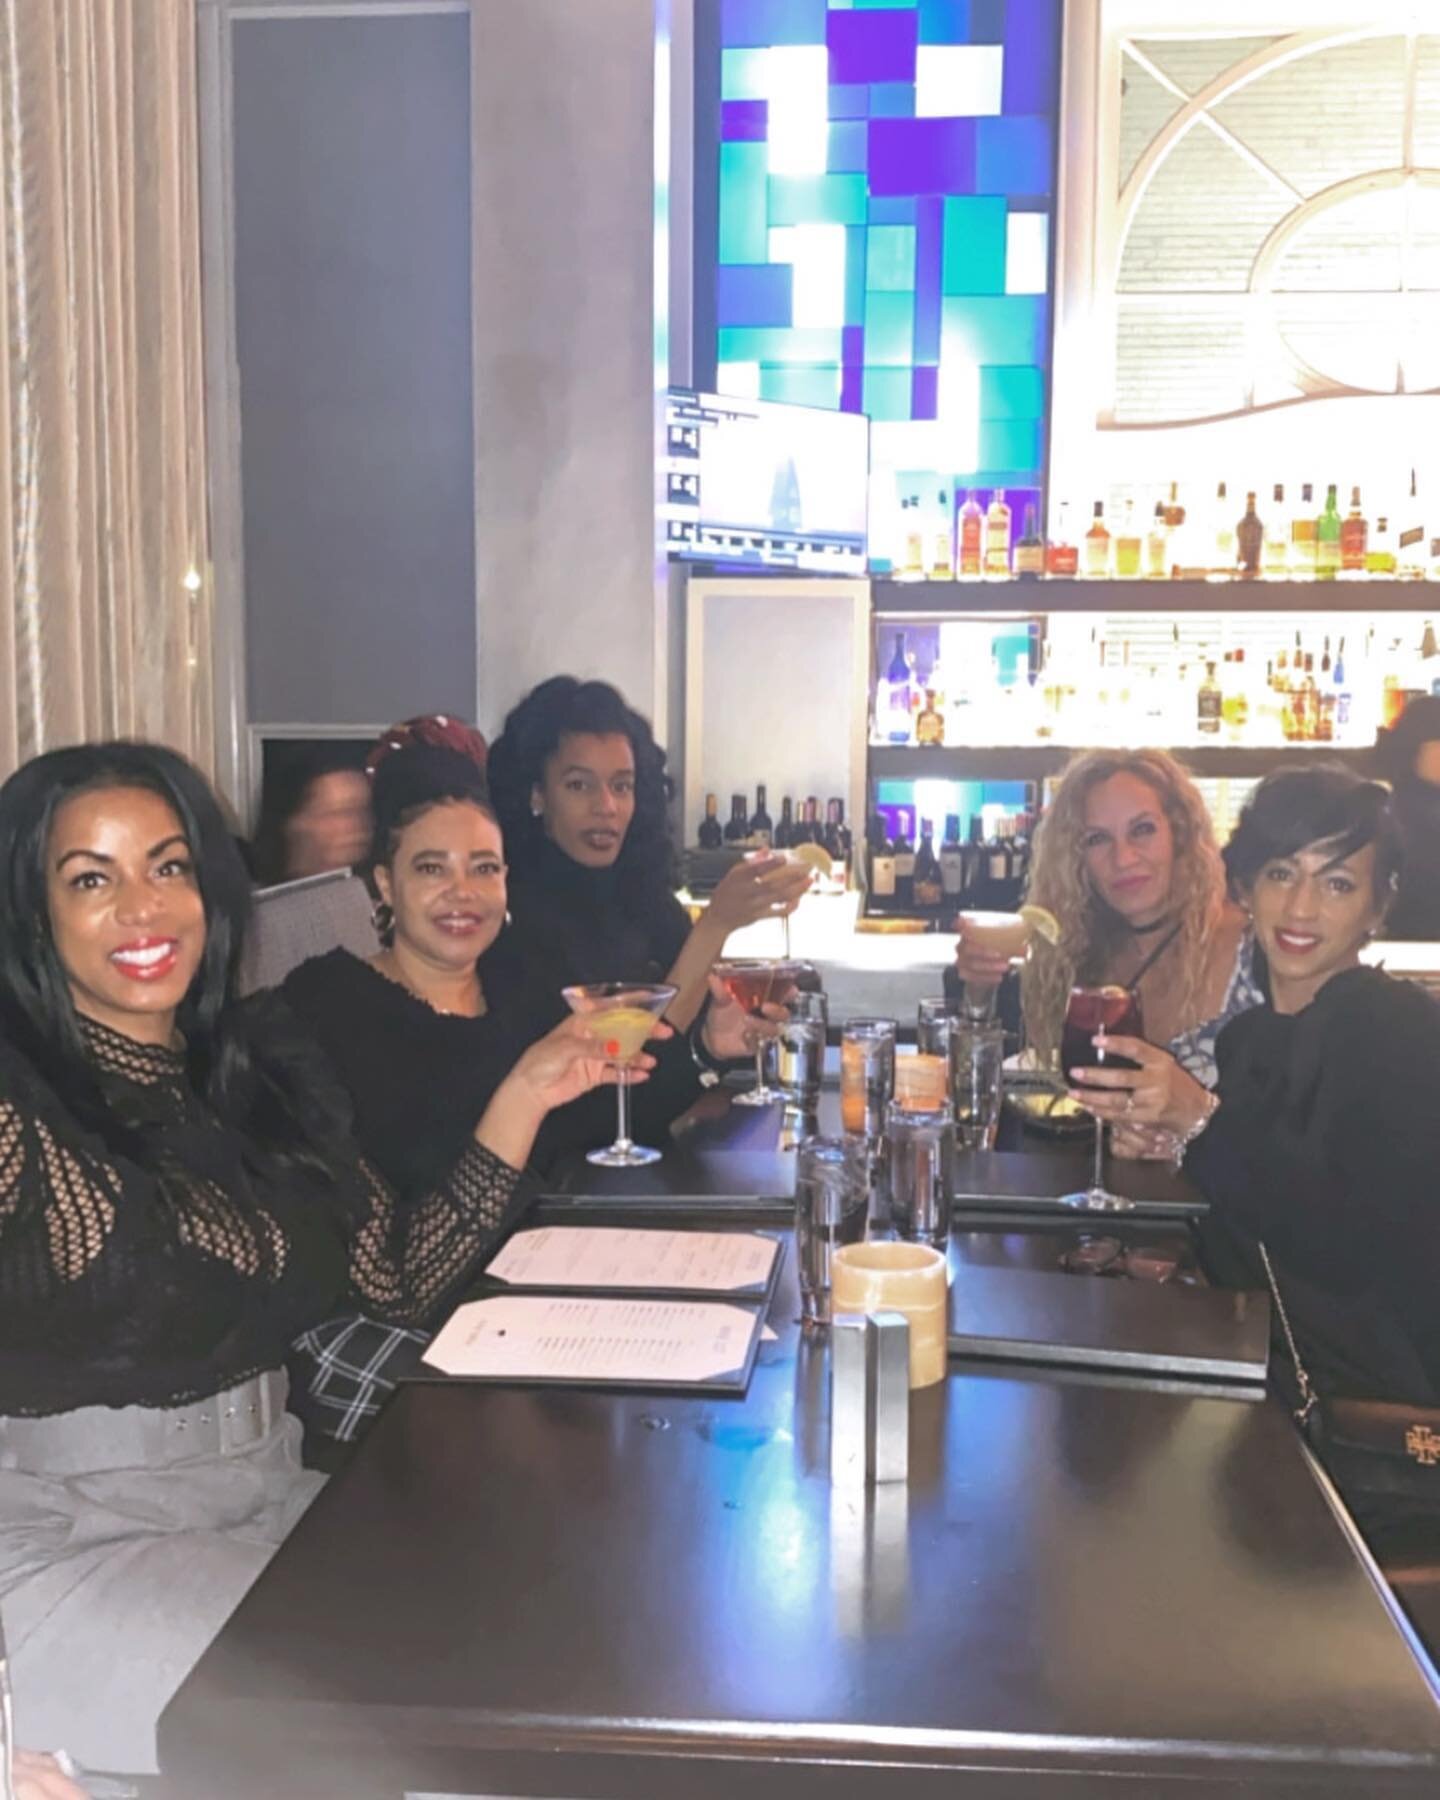 Salon Mon&eacute;t post holiday party. 💗💚
Being that December is one of the busiest months &amp;  January is one of the slowest it&rsquo;s Perfect for  quality time to enjoy each other&rsquo;s company with great food, great drinks &amp; a great tim